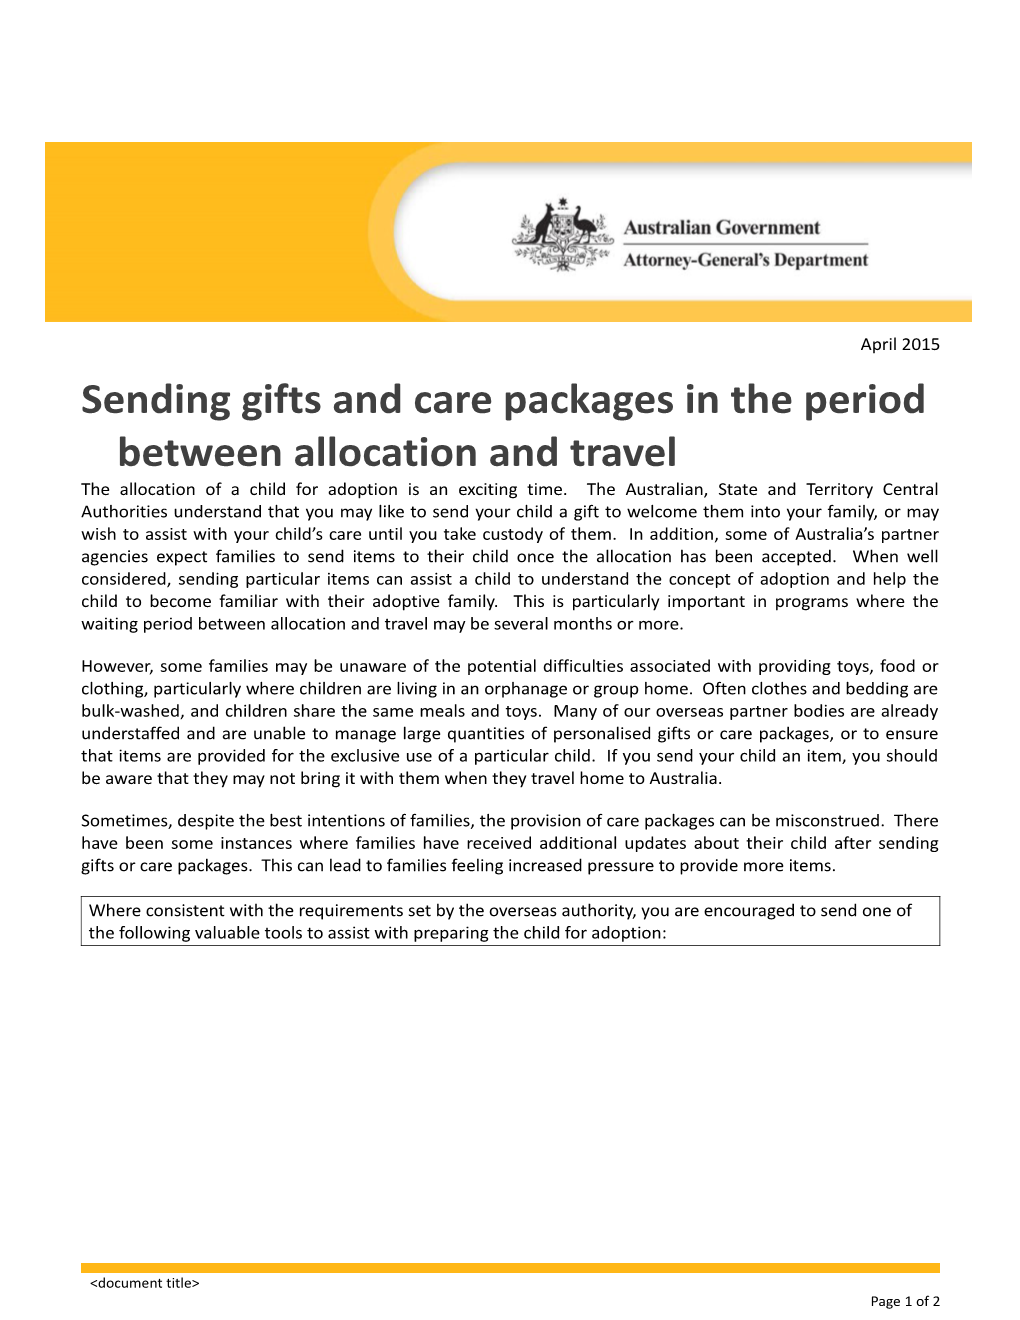 Sending Gifts and Care Packages Between Allocation and Travel